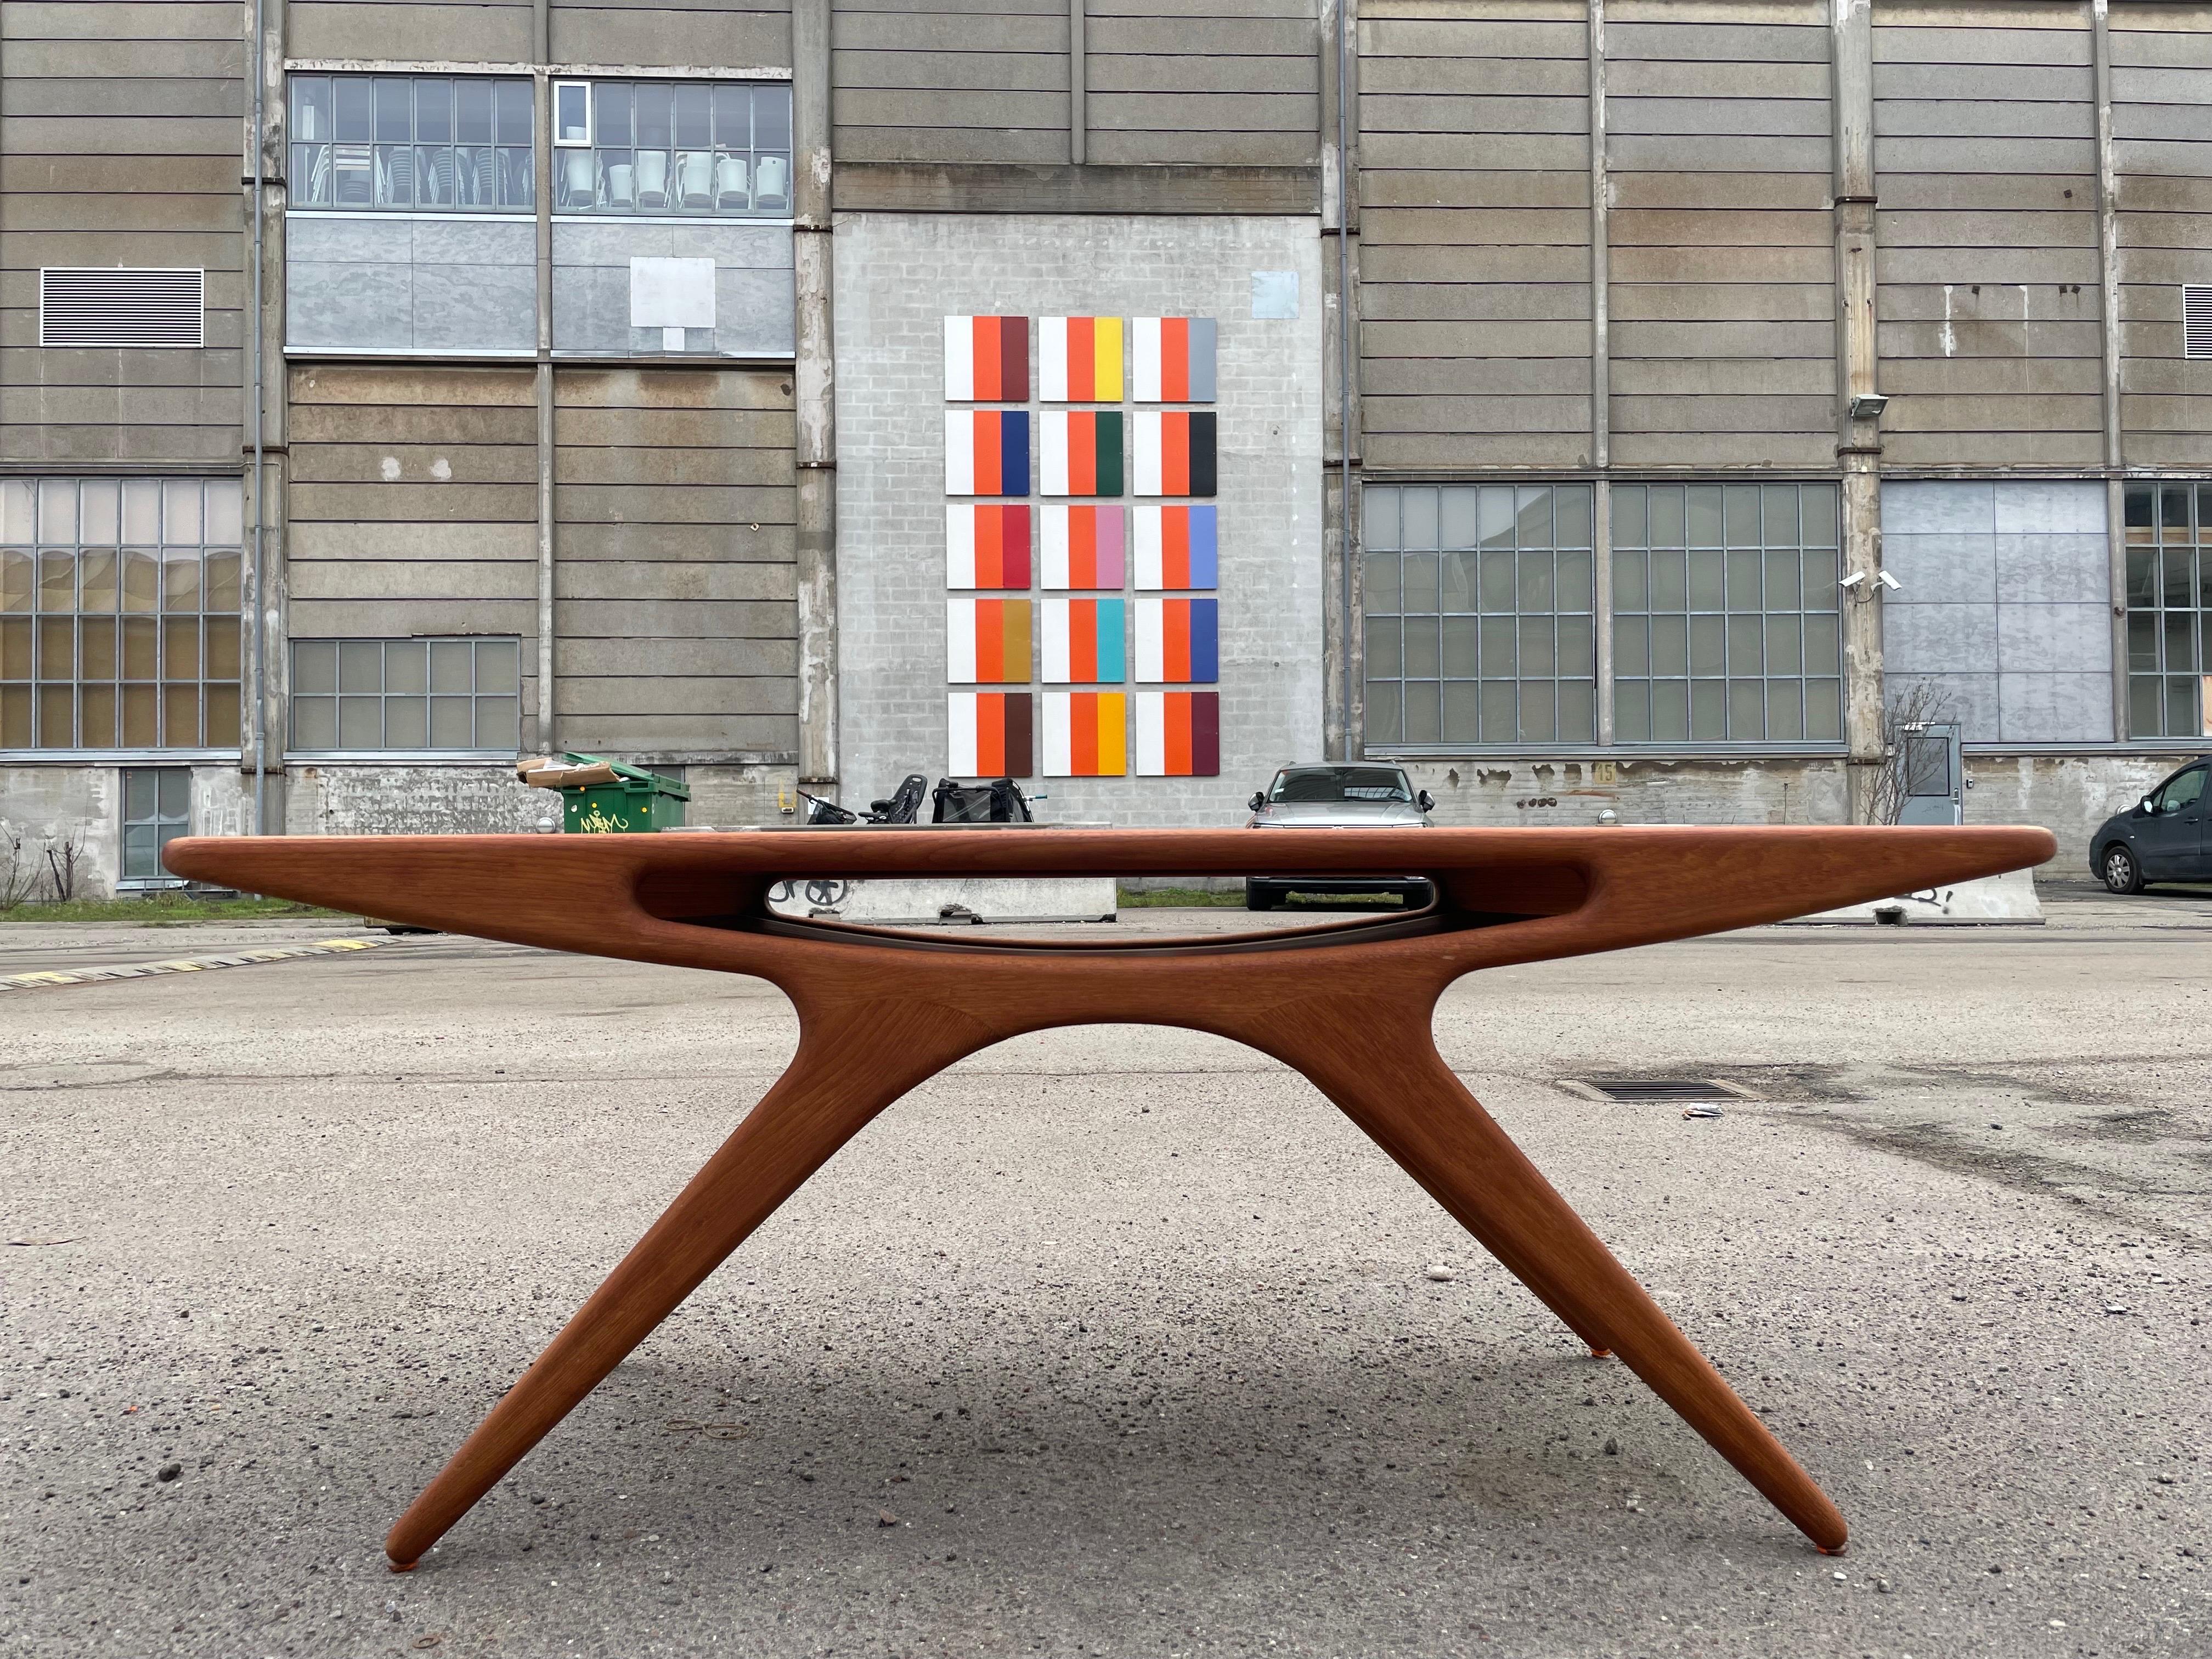 Johannes Andersen was a master of Mid-Century Modern design, and his smile coffee table is a rare and highly collectible piece that perfectly showcases his unique talent. With its sleek teak body and center pocket shelf, this table is not only